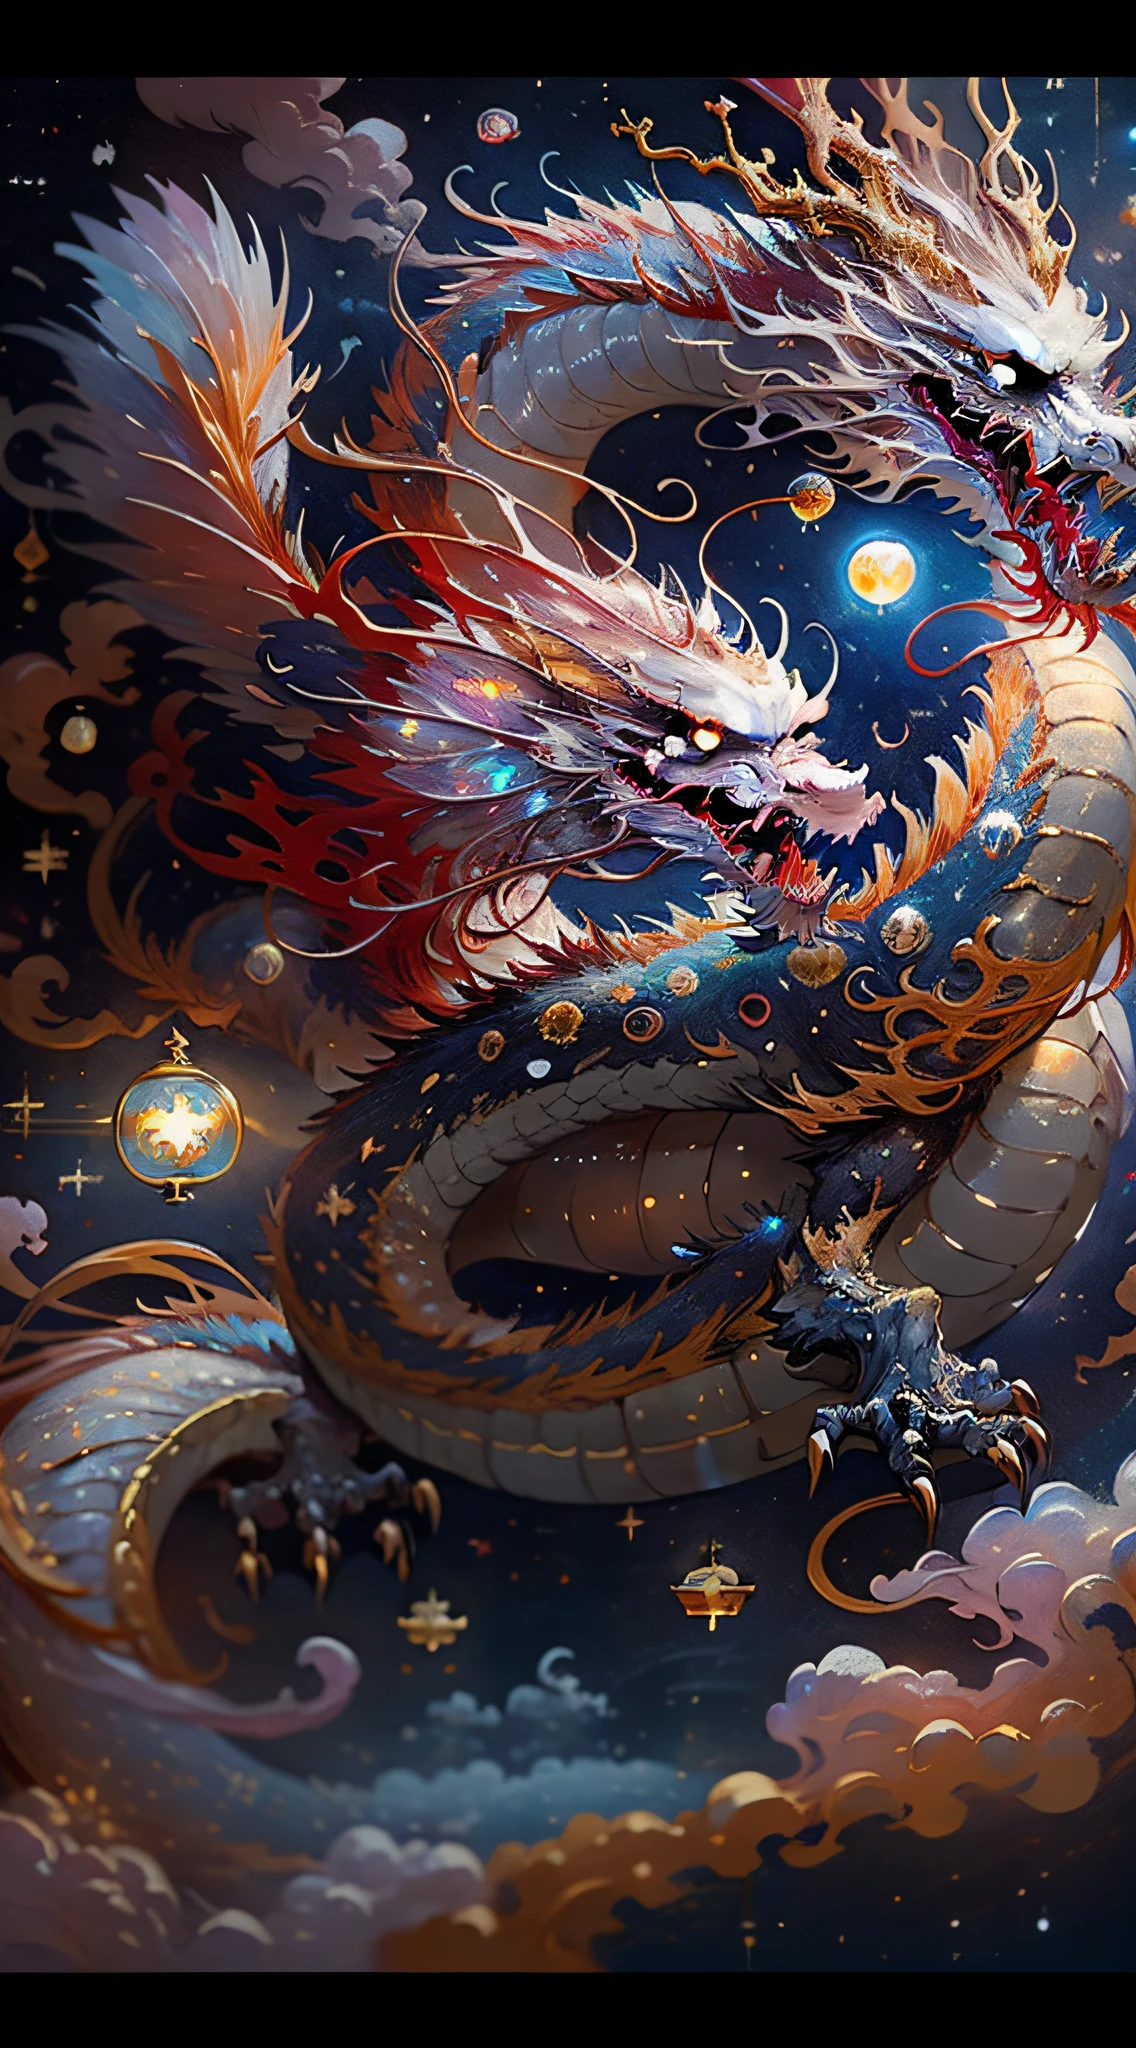 A celestial Chinese Dragon flying in the night sky, moon illuminating vibrant colors of dragon scales ((red, blue, gold:1.3)), mid-20th century vintage oil painting vibe ((Van Gogh style:1.2)), (pearly teeth:1.5), fiery eyes, cosmic stars in the background, (galaxy:1.3), fire-breathing, inspired by the works of Xu Beihong.